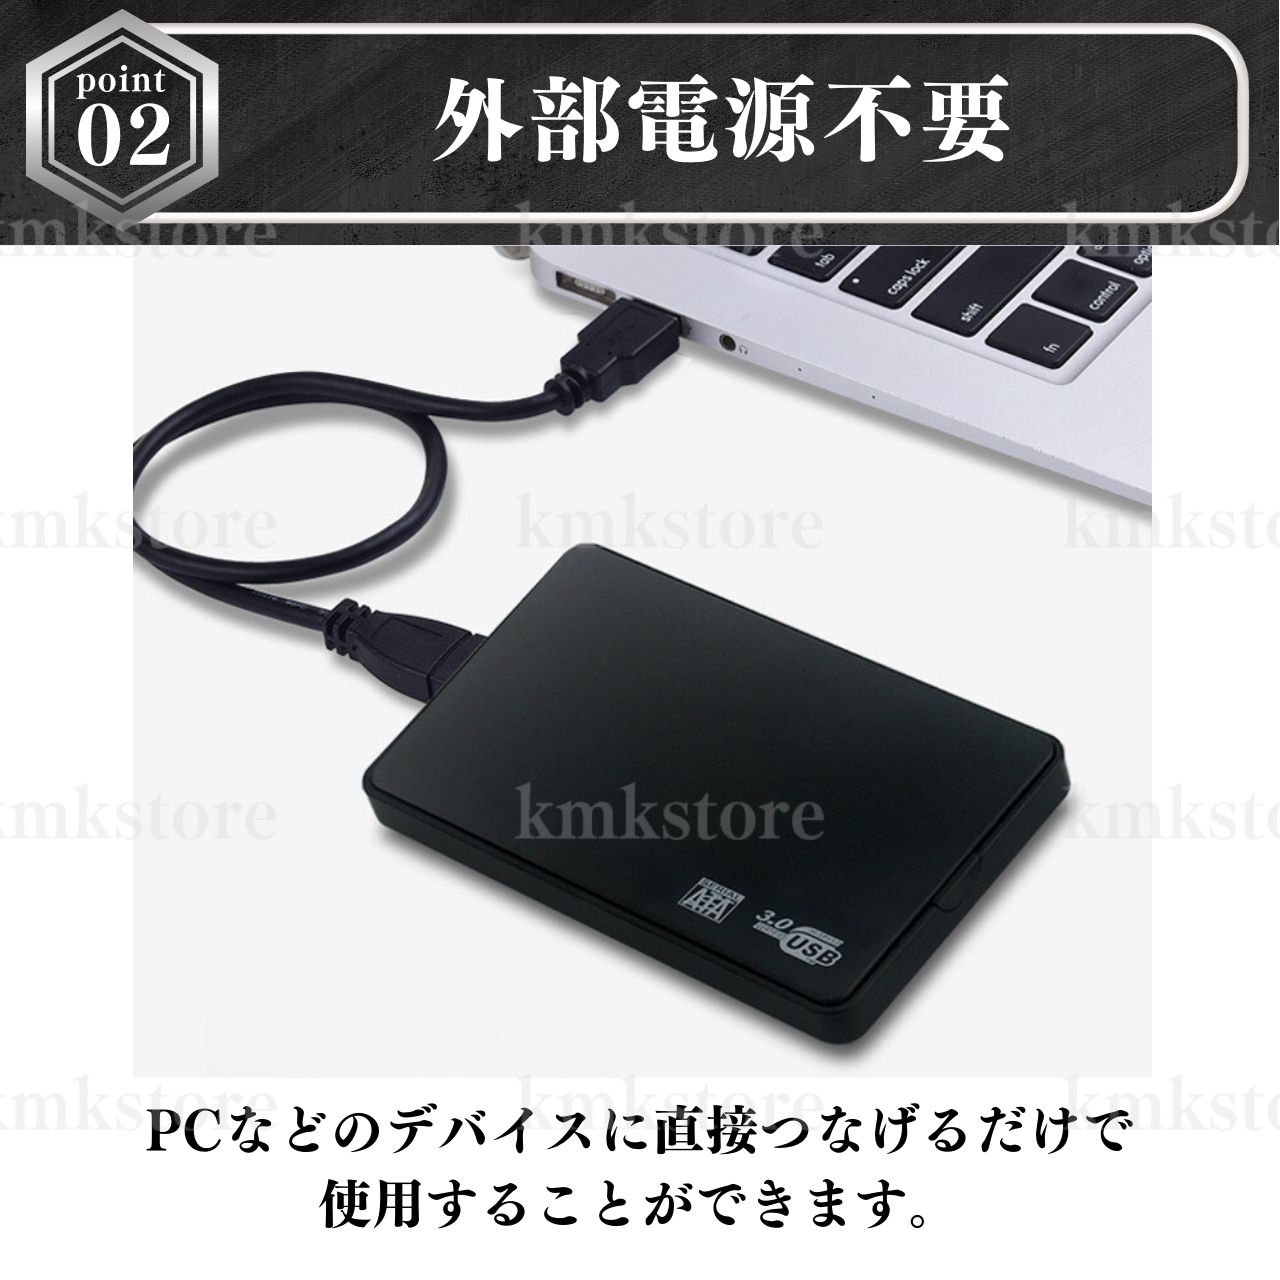  attached outside HDD SSD case SATA hard disk 2.5 -inch USB3.0 high speed data transfer USB cable 